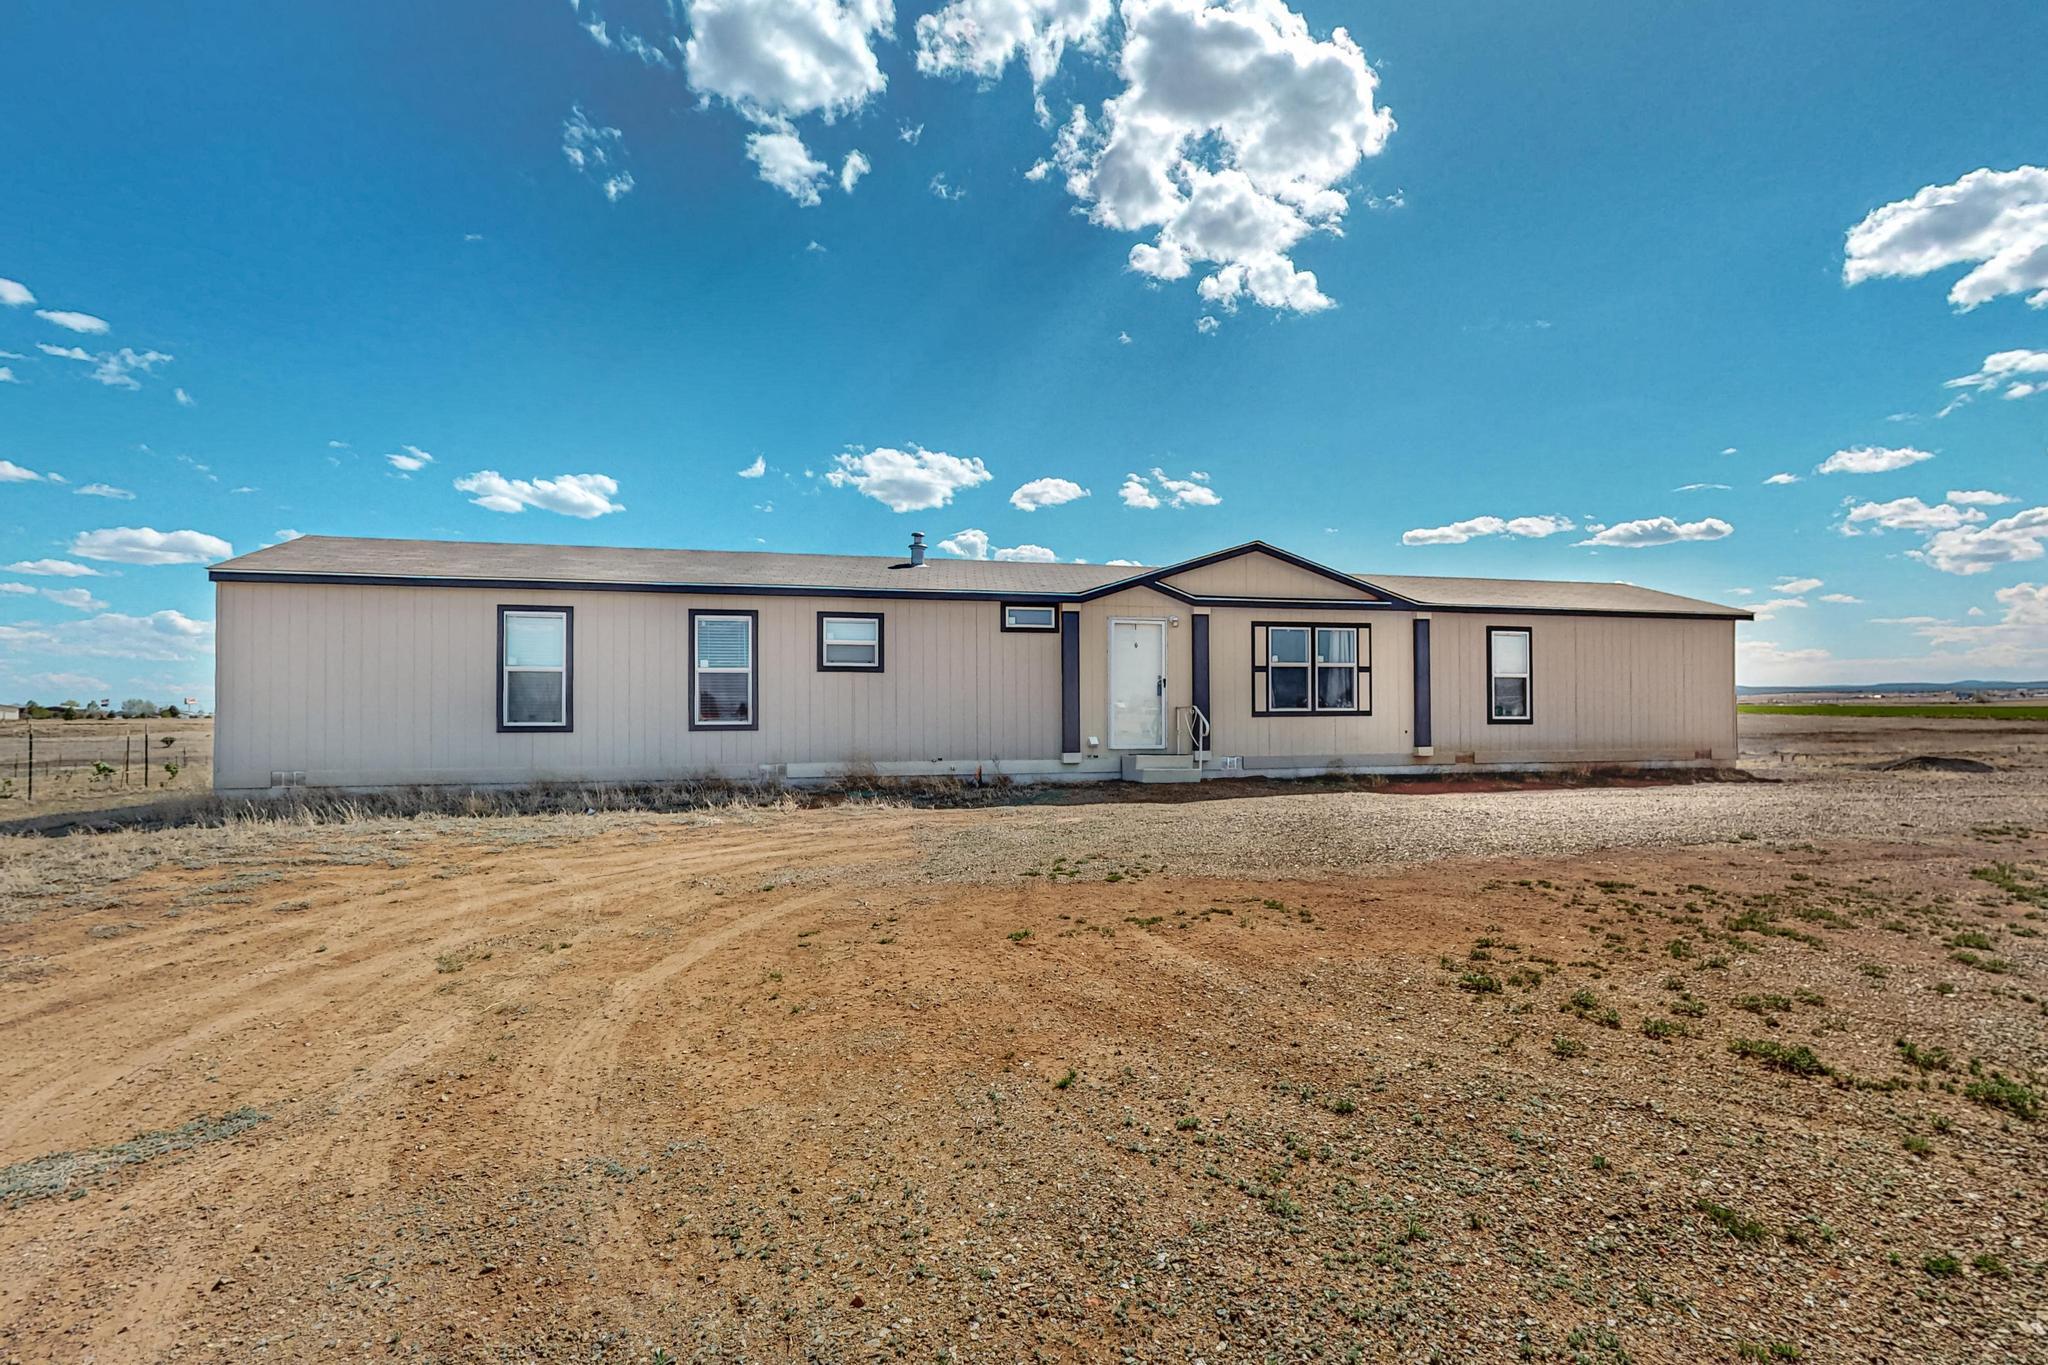 15 Capitan Street, Moriarty, New Mexico 87035, 3 Bedrooms Bedrooms, ,2 BathroomsBathrooms,Residential,For Sale,15 Capitan Street,1061420